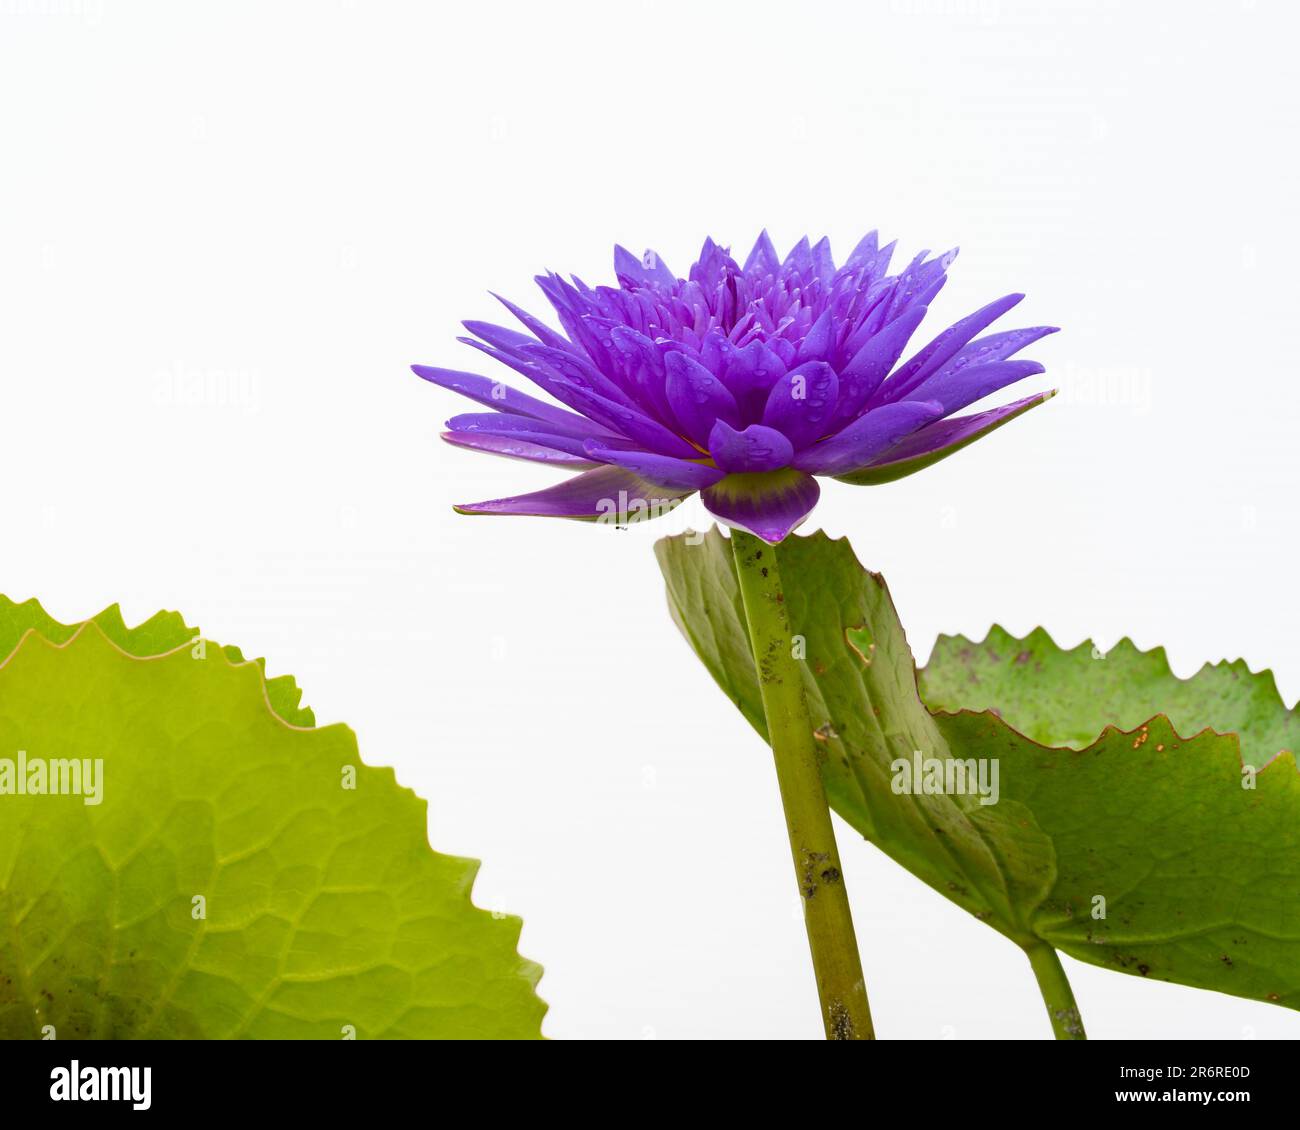 Closeup view of colorful purple blue water lily king of siam nymphaea flower and leaves isolated on white background Stock Photo